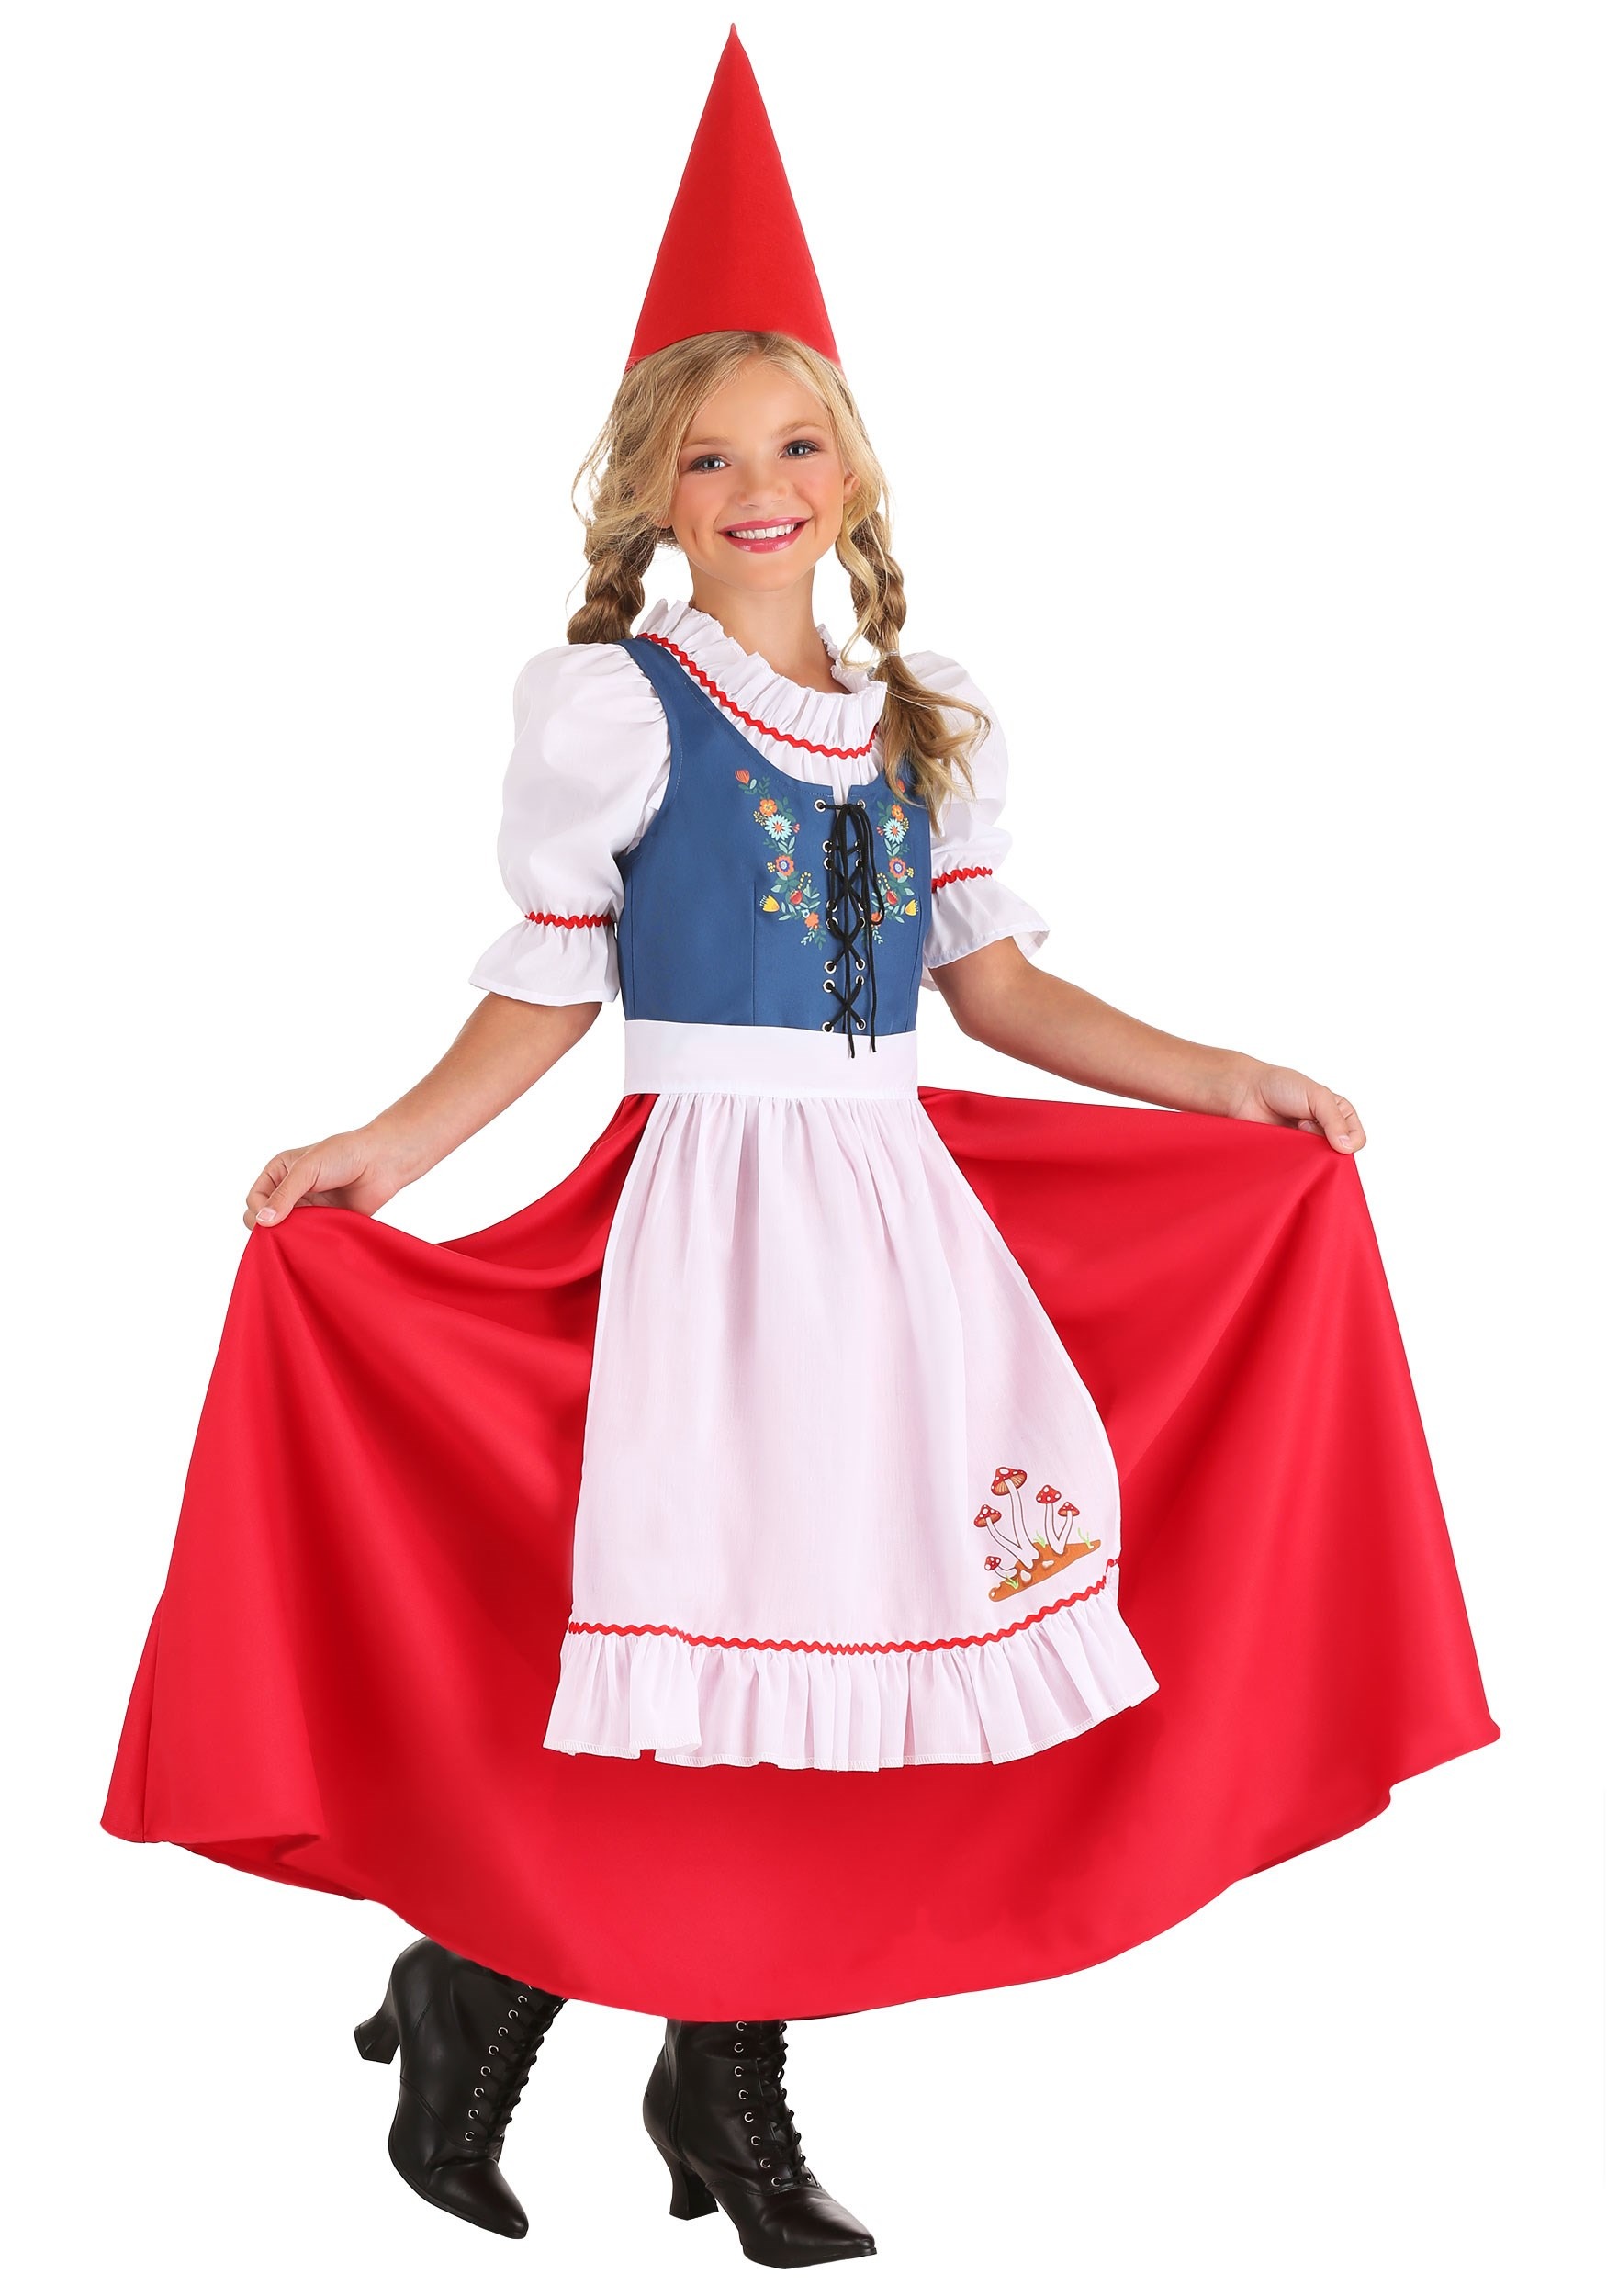 Photos - Fancy Dress FUN Costumes Exclusive Girl's Garden Gnome Costume Blue/Red/White